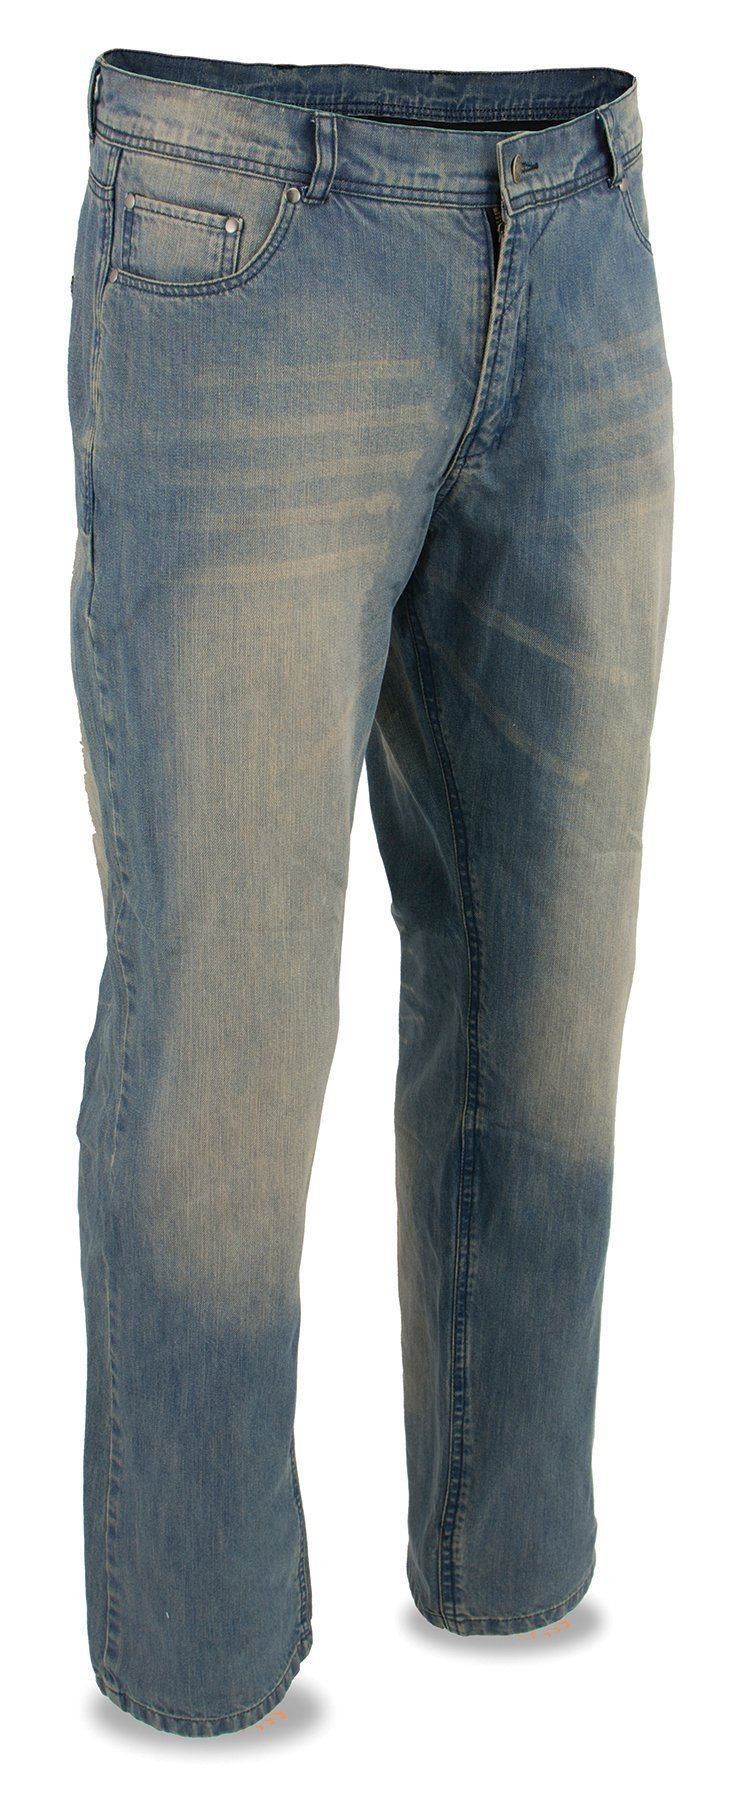 Milwaukee Performance MDM5003 Men's Blue Armored Denim Jeans Reinforced with Aramid by DuPont Fibers - Milwaukee Performance Mens Denim Pants